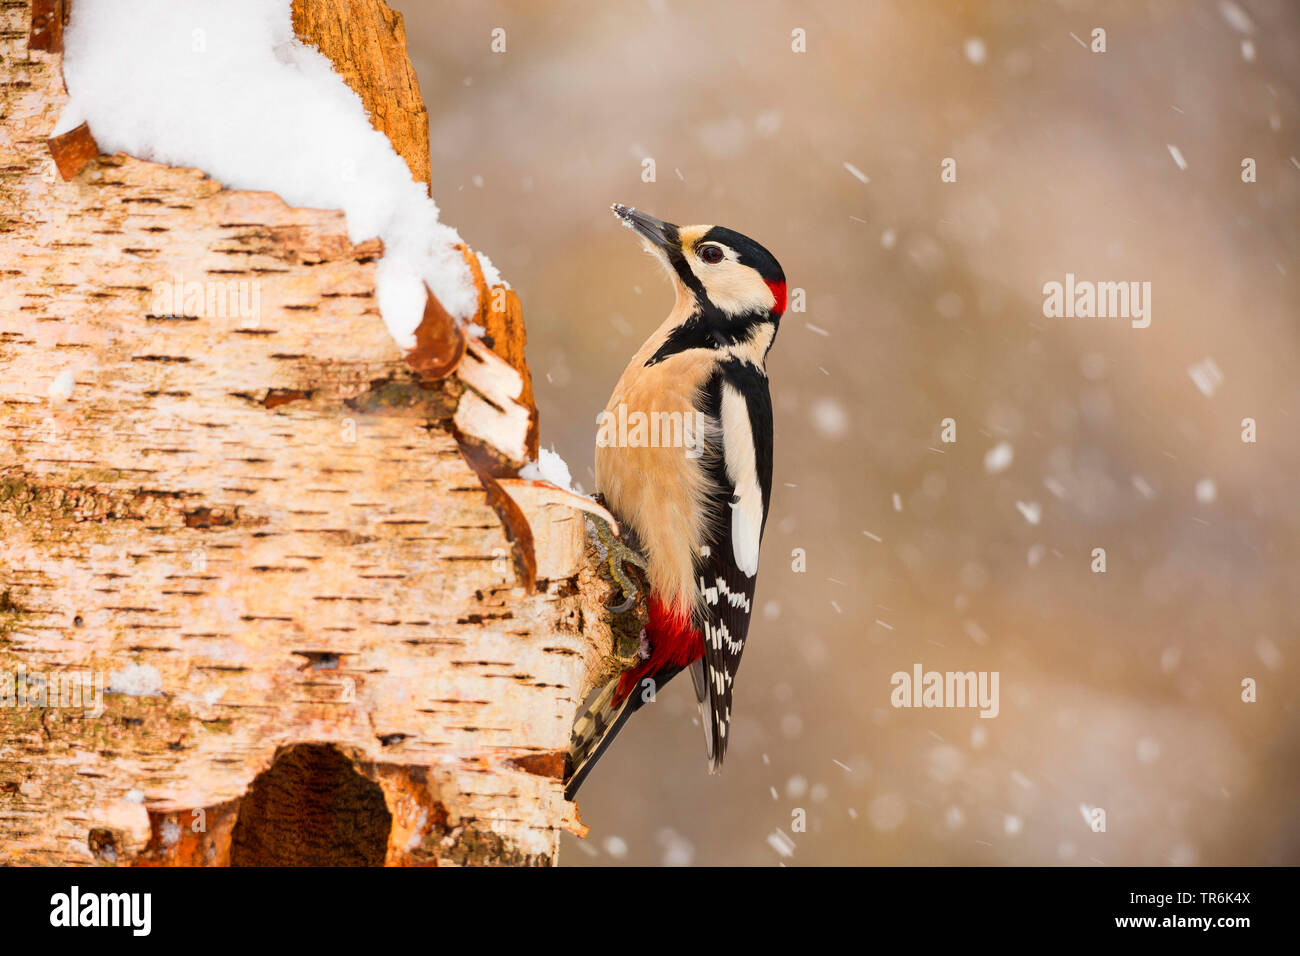 Great spotted woodpecker (Picoides major, Dendrocopos major), sitting at a birch trunk in winter, Germany Stock Photo